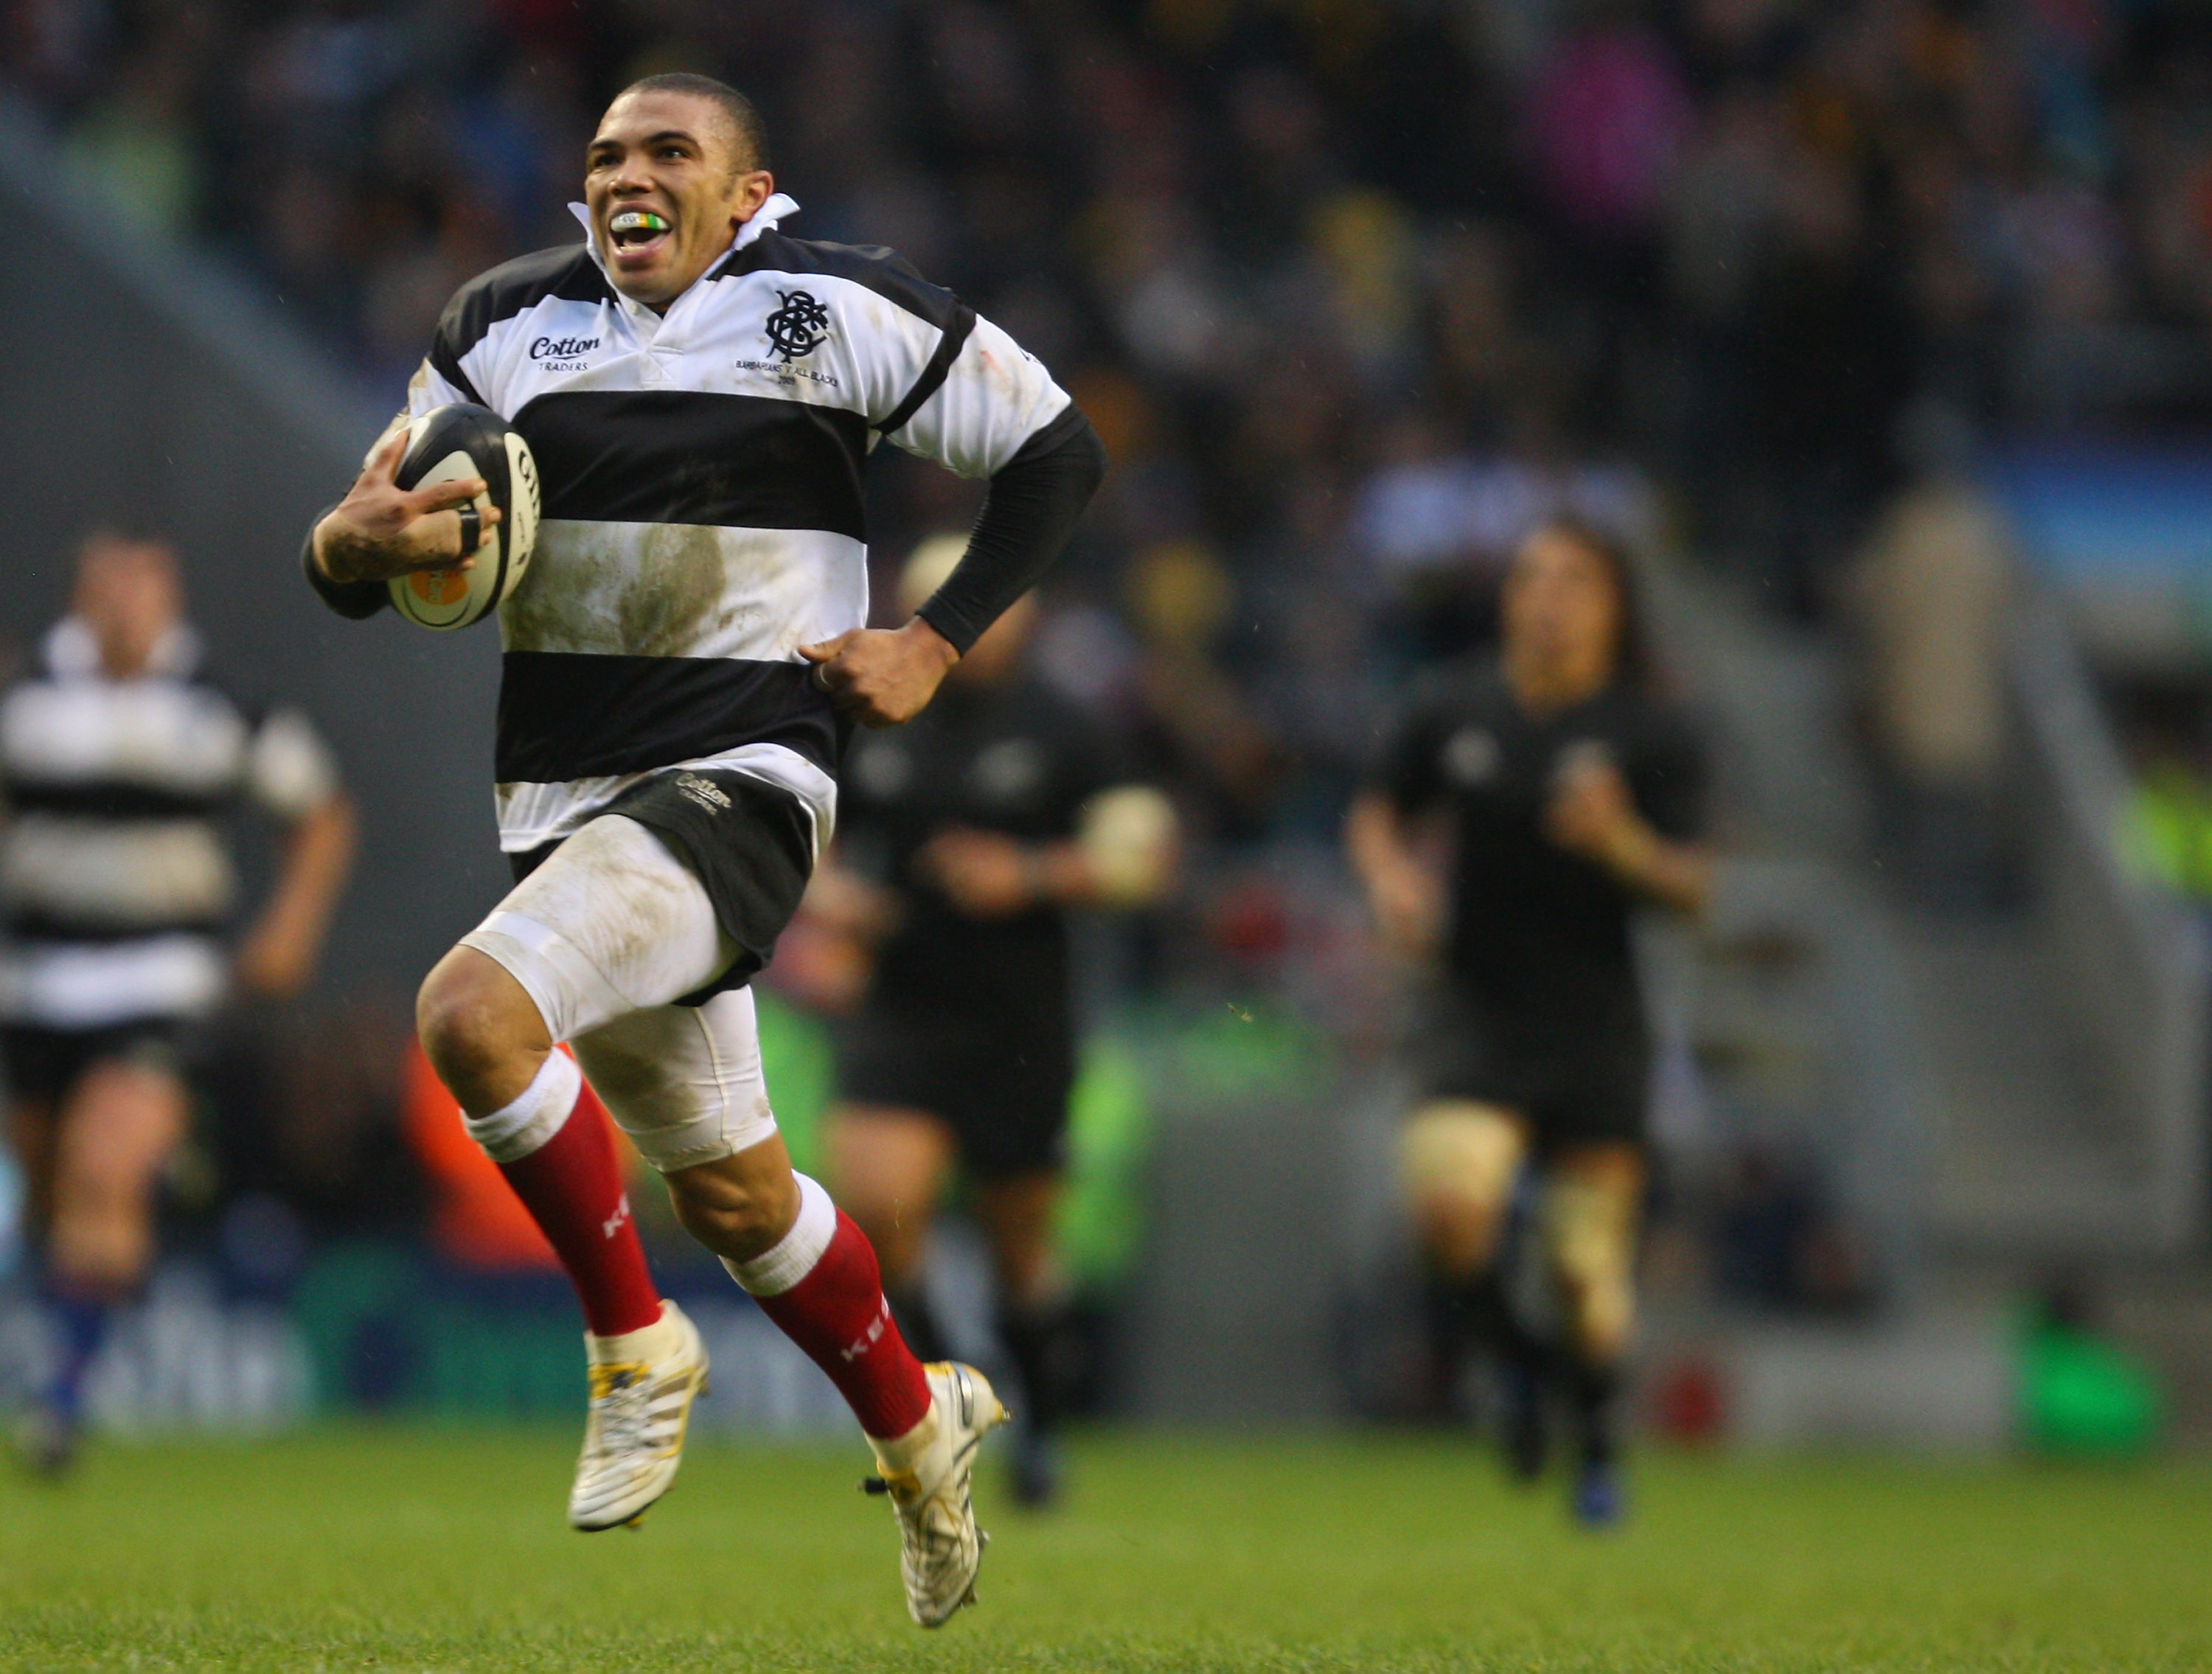 LONDON, ENGLAND - DECEMBER 05: Bryan Habana of the Barbarians runs in to score his second try during the MasterCard trophy match between Barbarians and New Zealand at Twickenham Stadium on December 5, 2009 in London, England. (Photo by Mark Thompson/Getty Images)